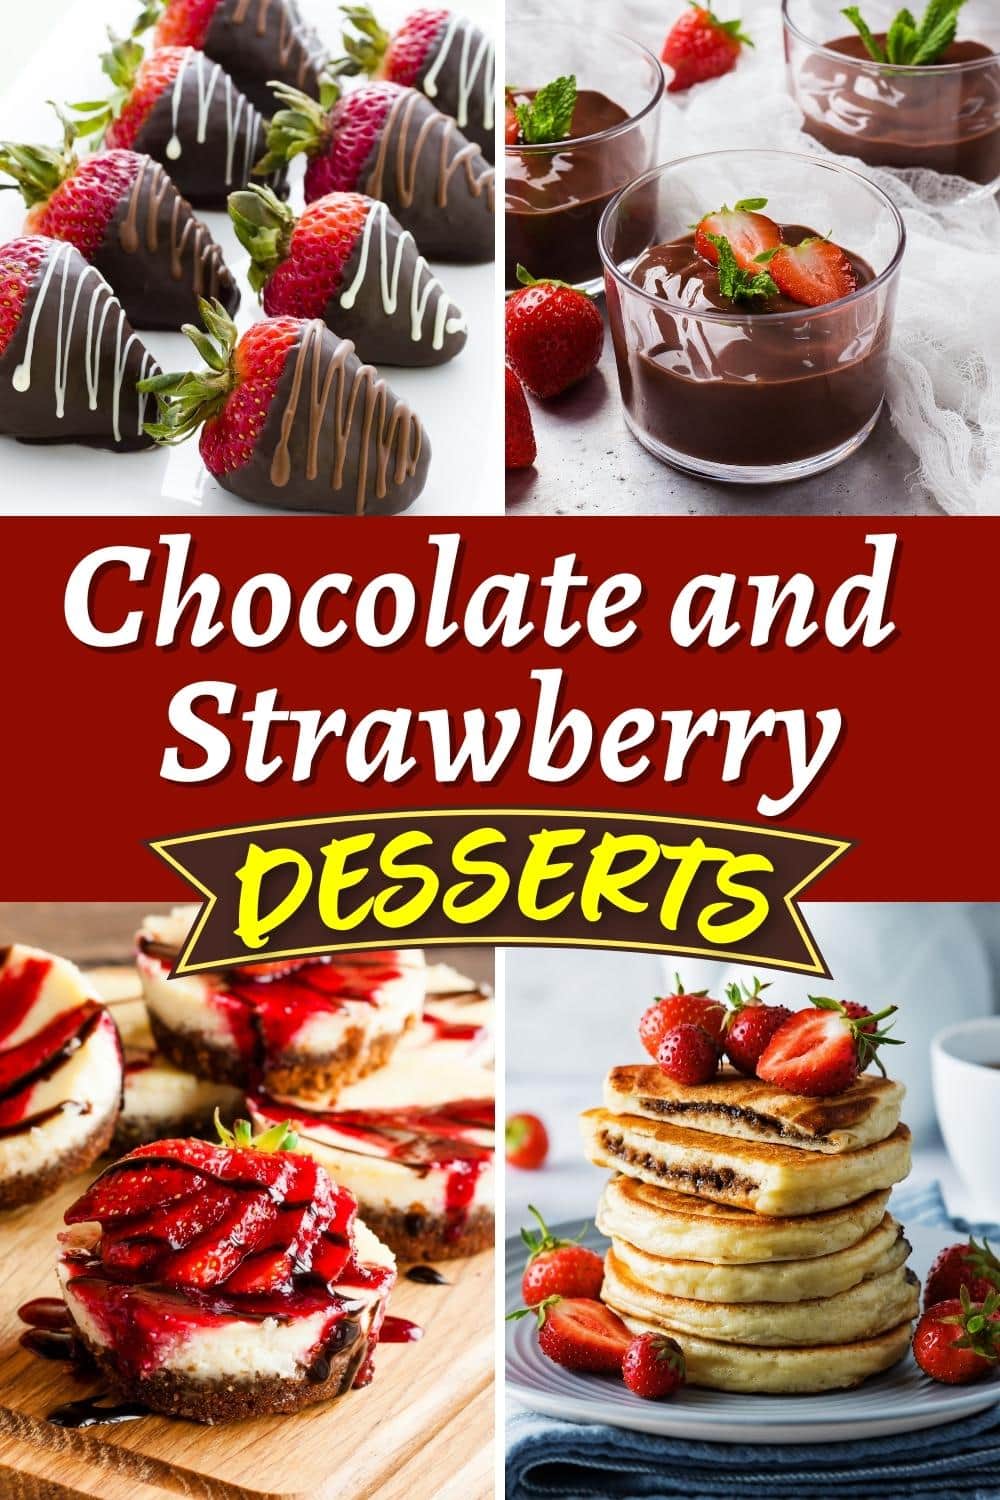 30 Best Chocolate and Strawberry Desserts - Insanely Good